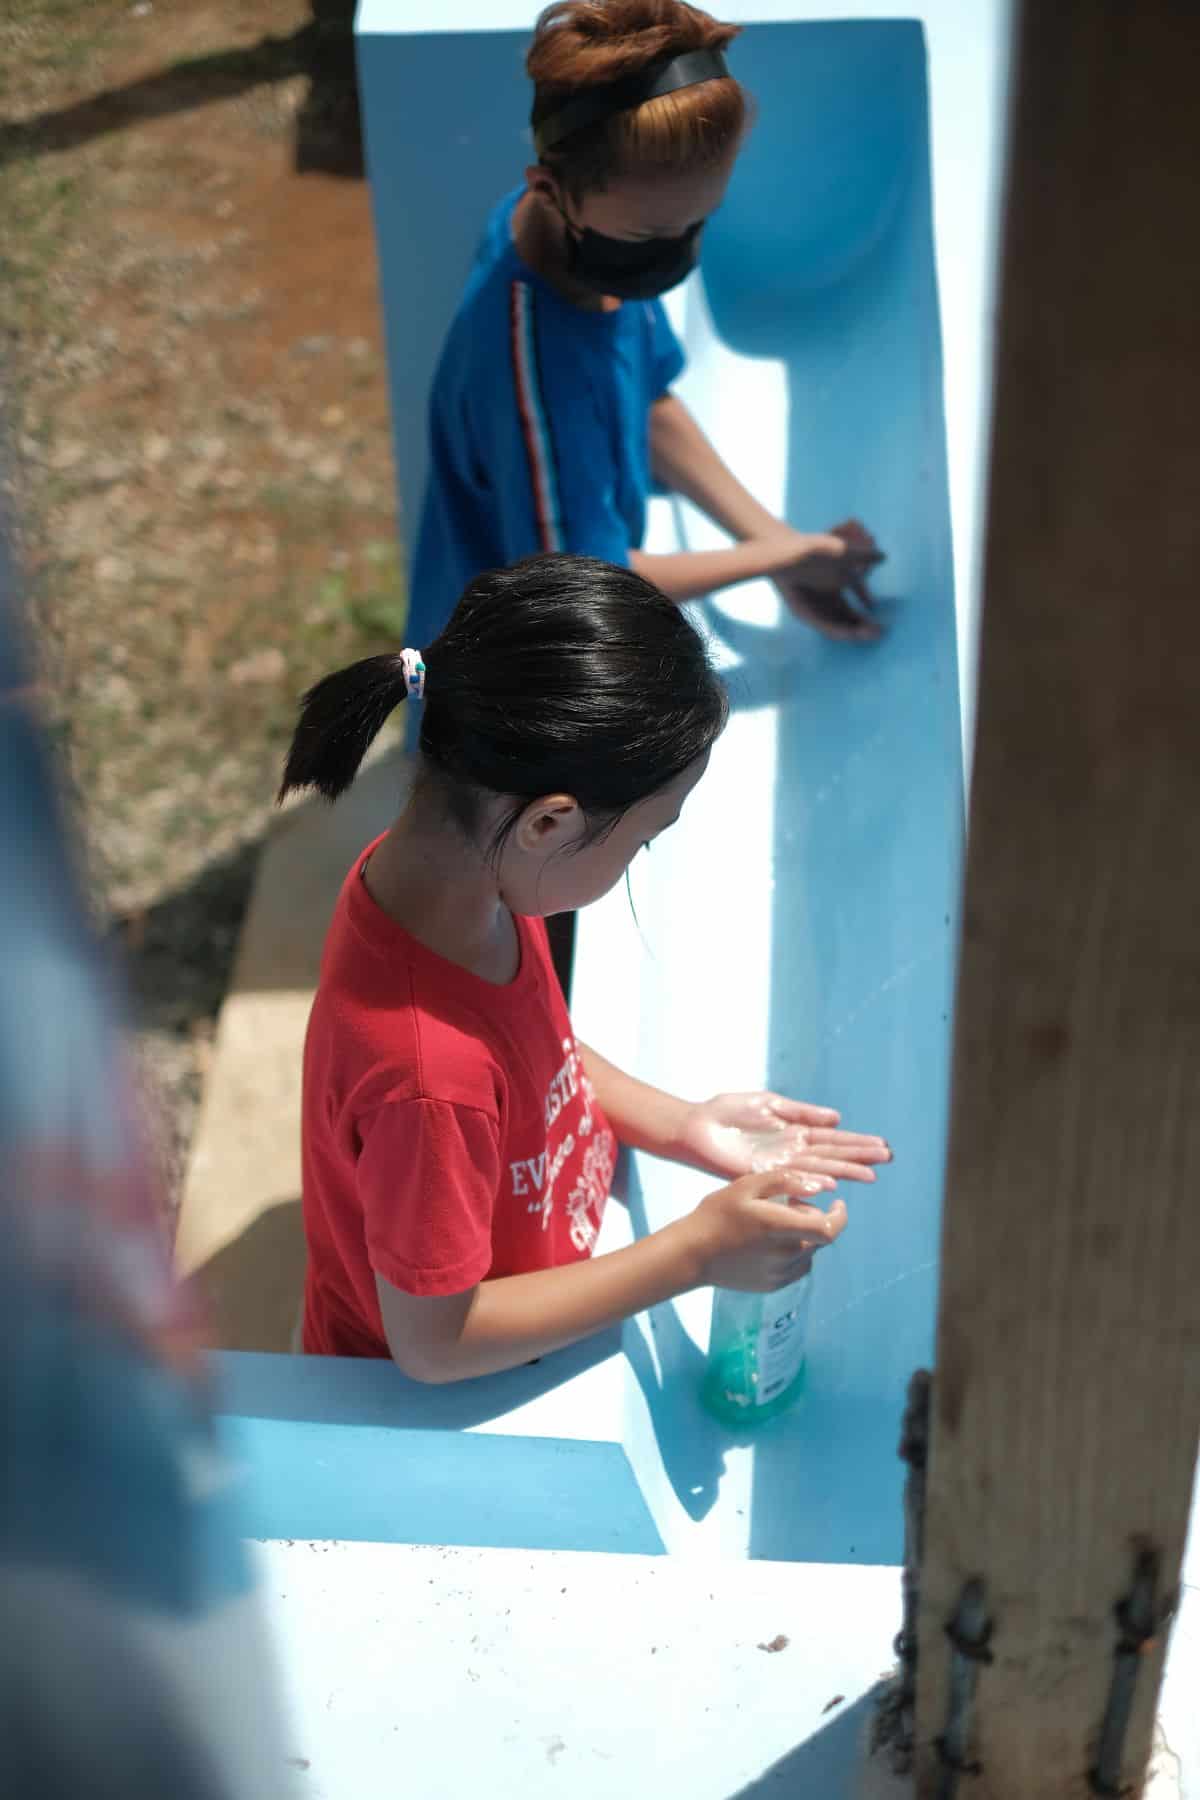 Handwashing is a crucial part of protecting the health of students like Abby. Here, she uses the handwashing stations that come with the BioSand Water filter at her school.